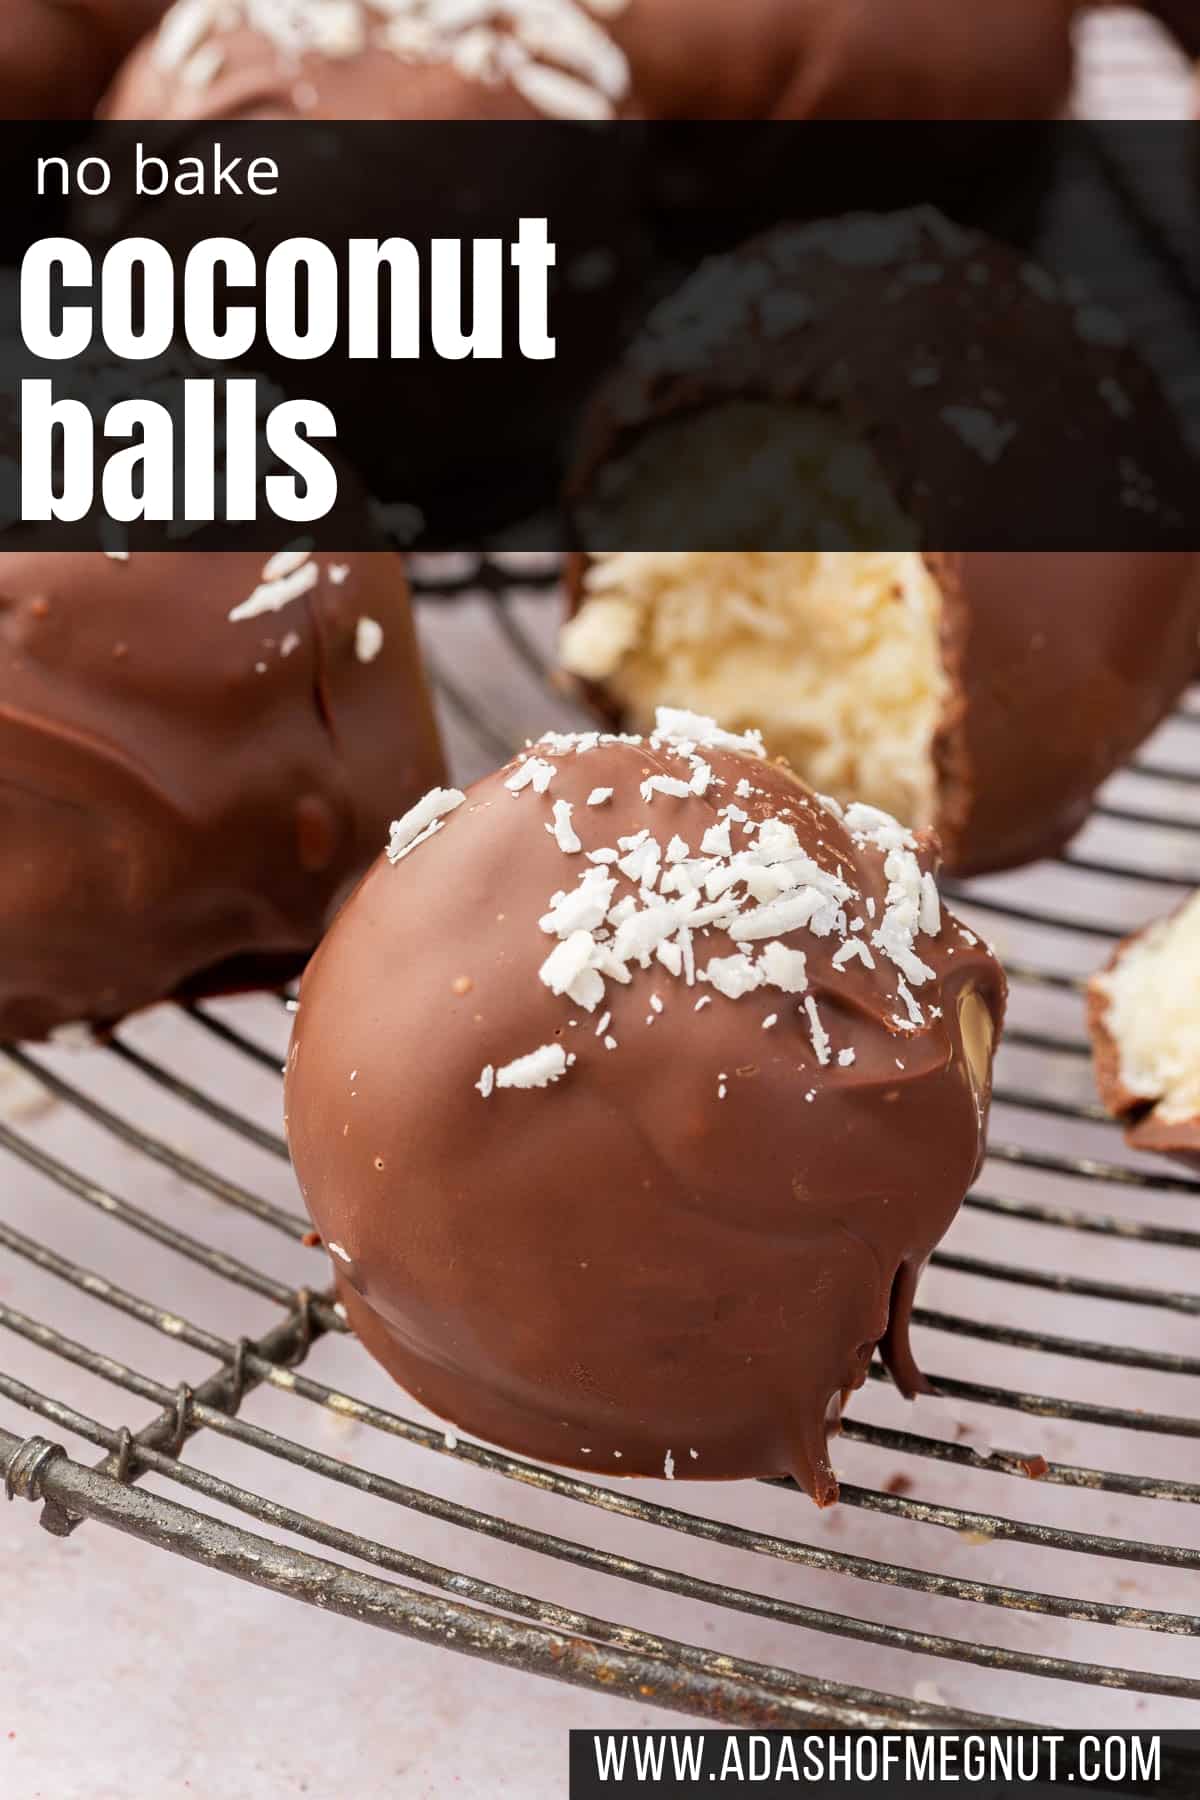 A single chocolate covered coconut ball on a wire cooling rack with more coconut truffles in the background.